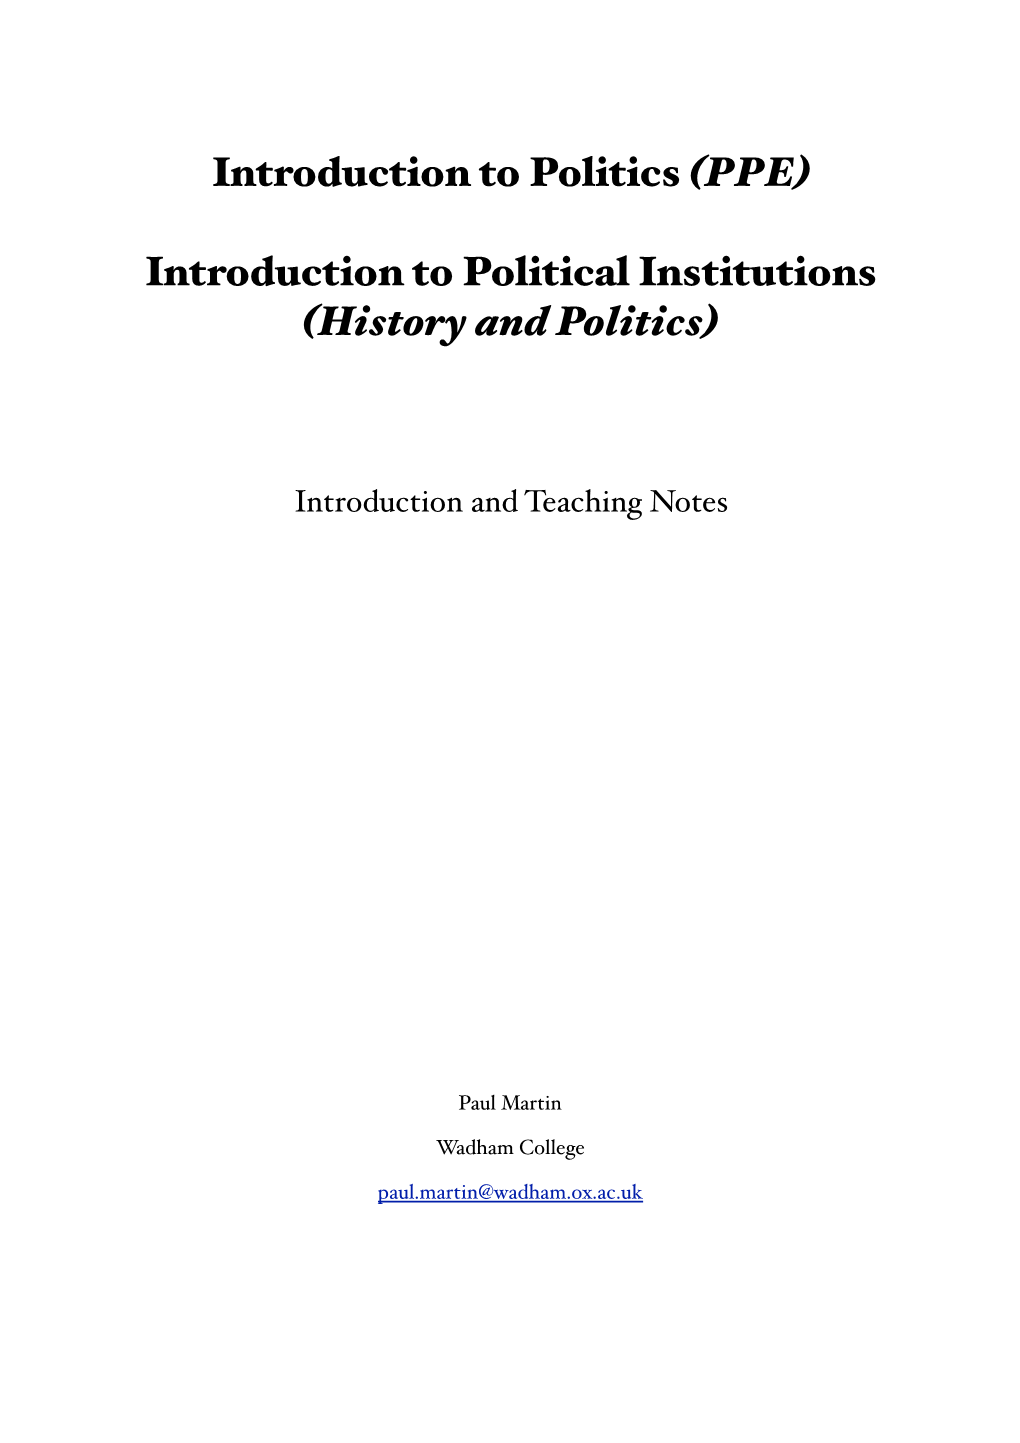 PPE) Introduction to Political Institutions (History and Politics